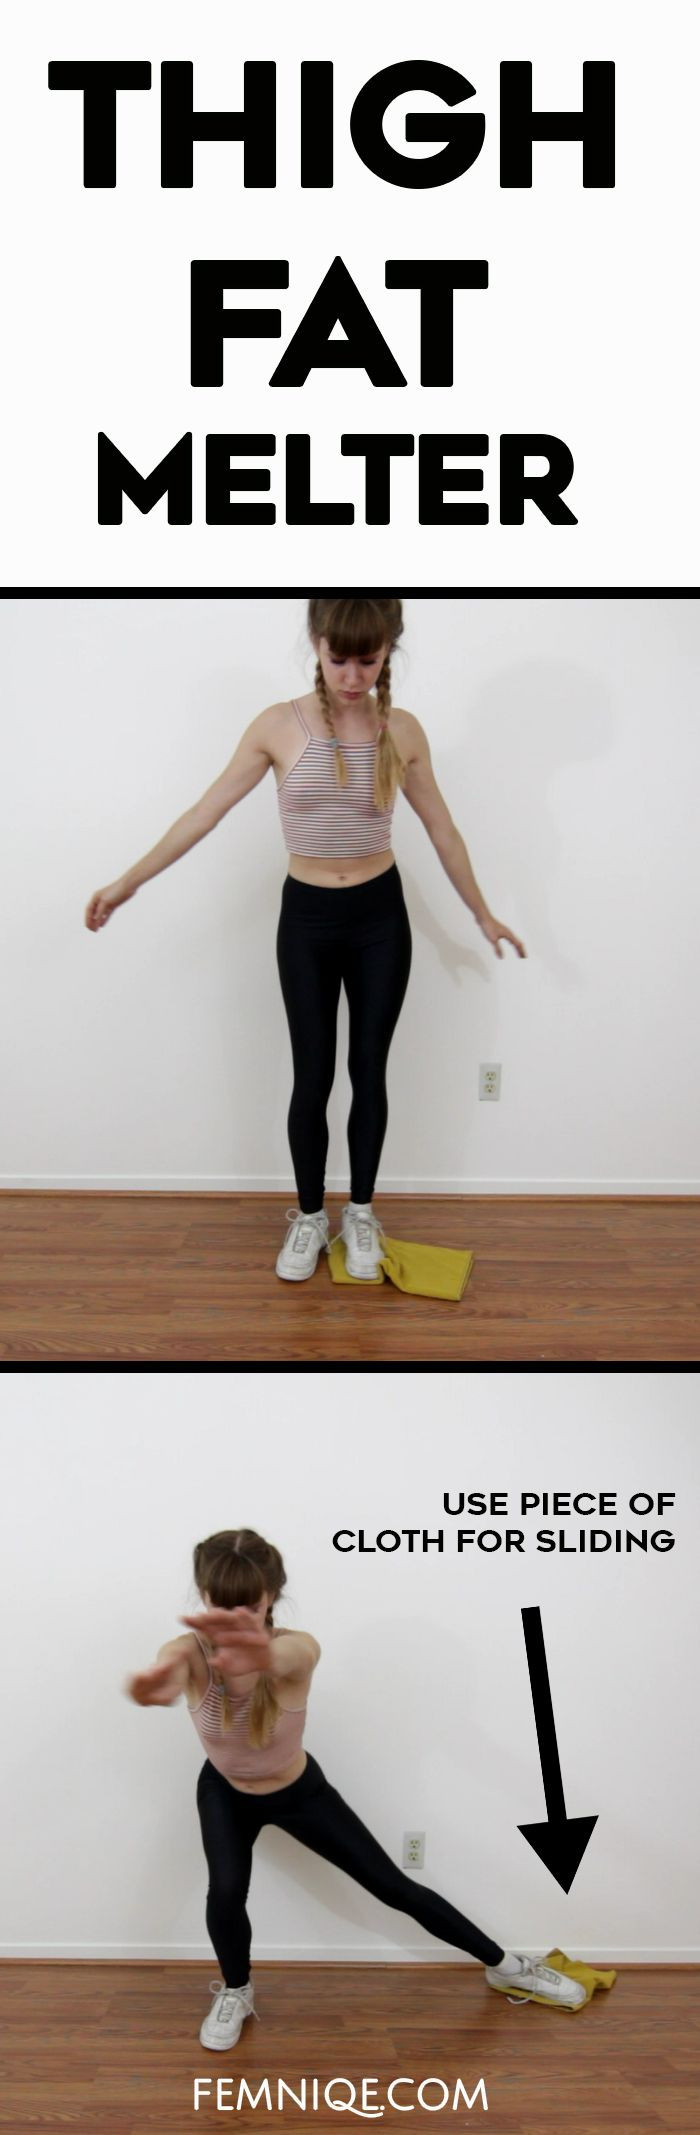 Thigh Weight Loss Exercise
 121 best Weight Loss Hacks images on Pinterest